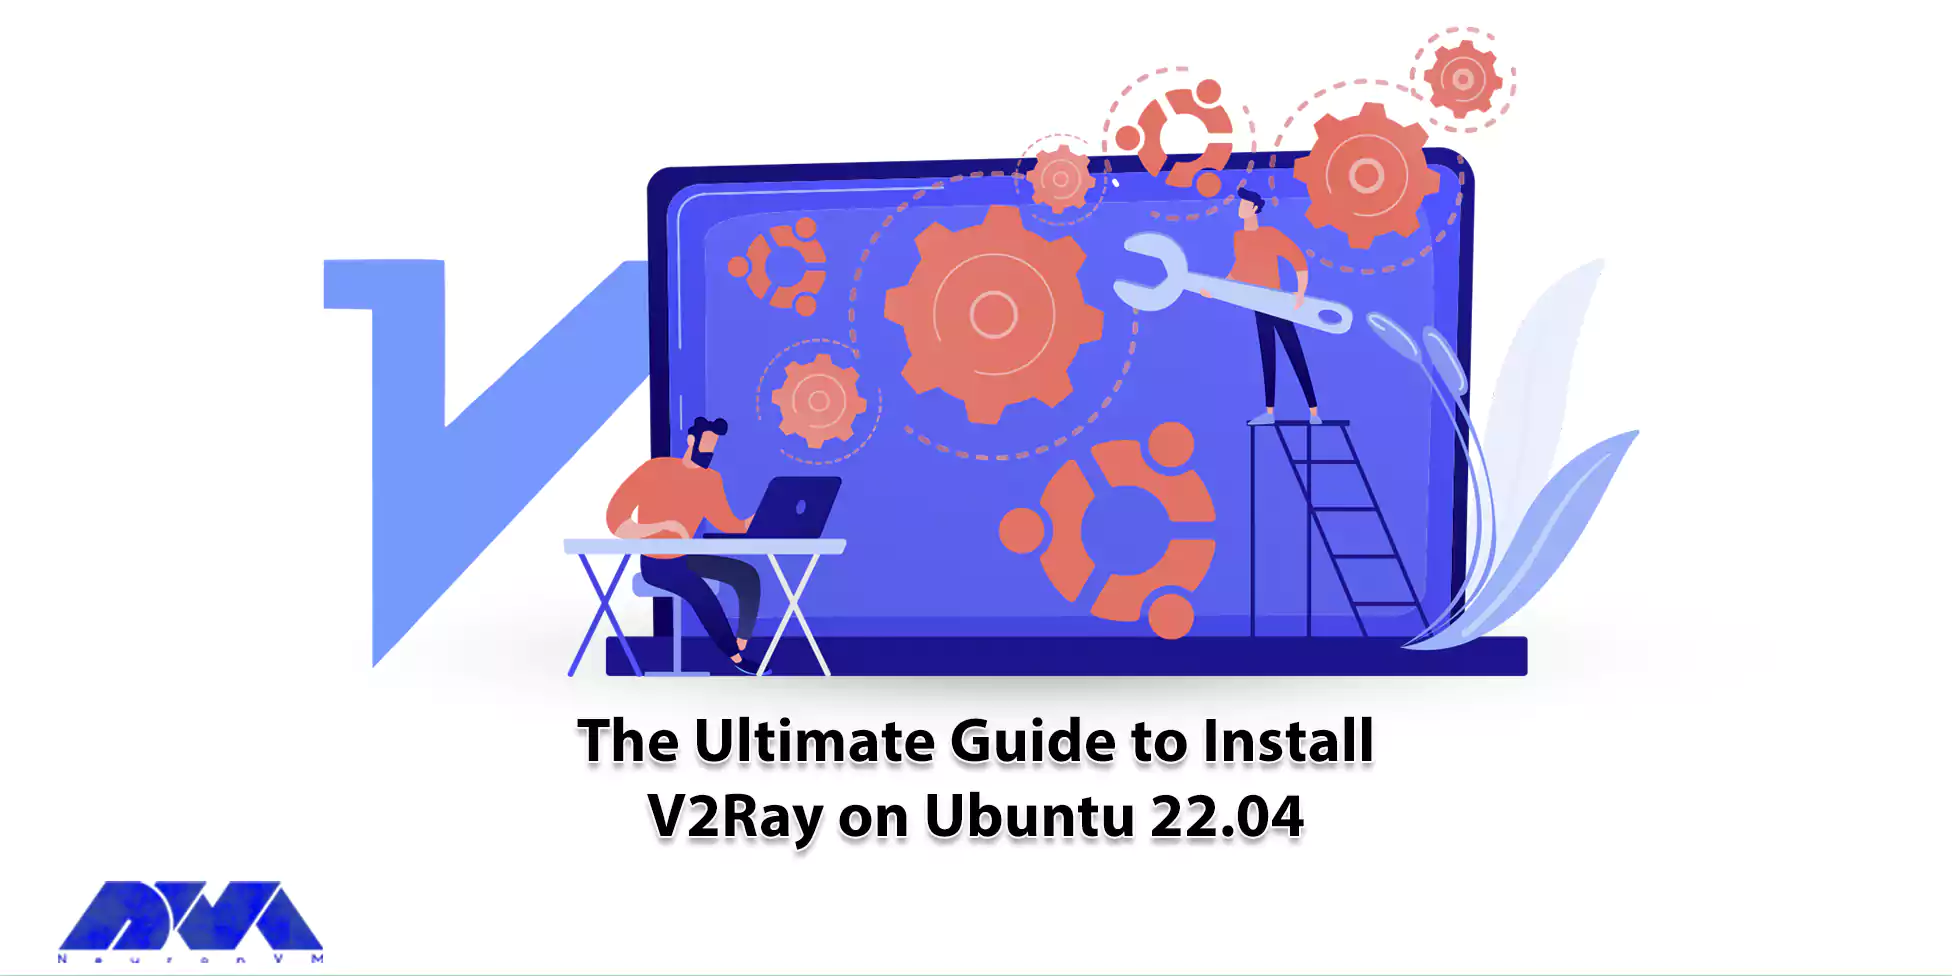 The Ultimate Guide to Install V2Ray on Ubuntu 22.04